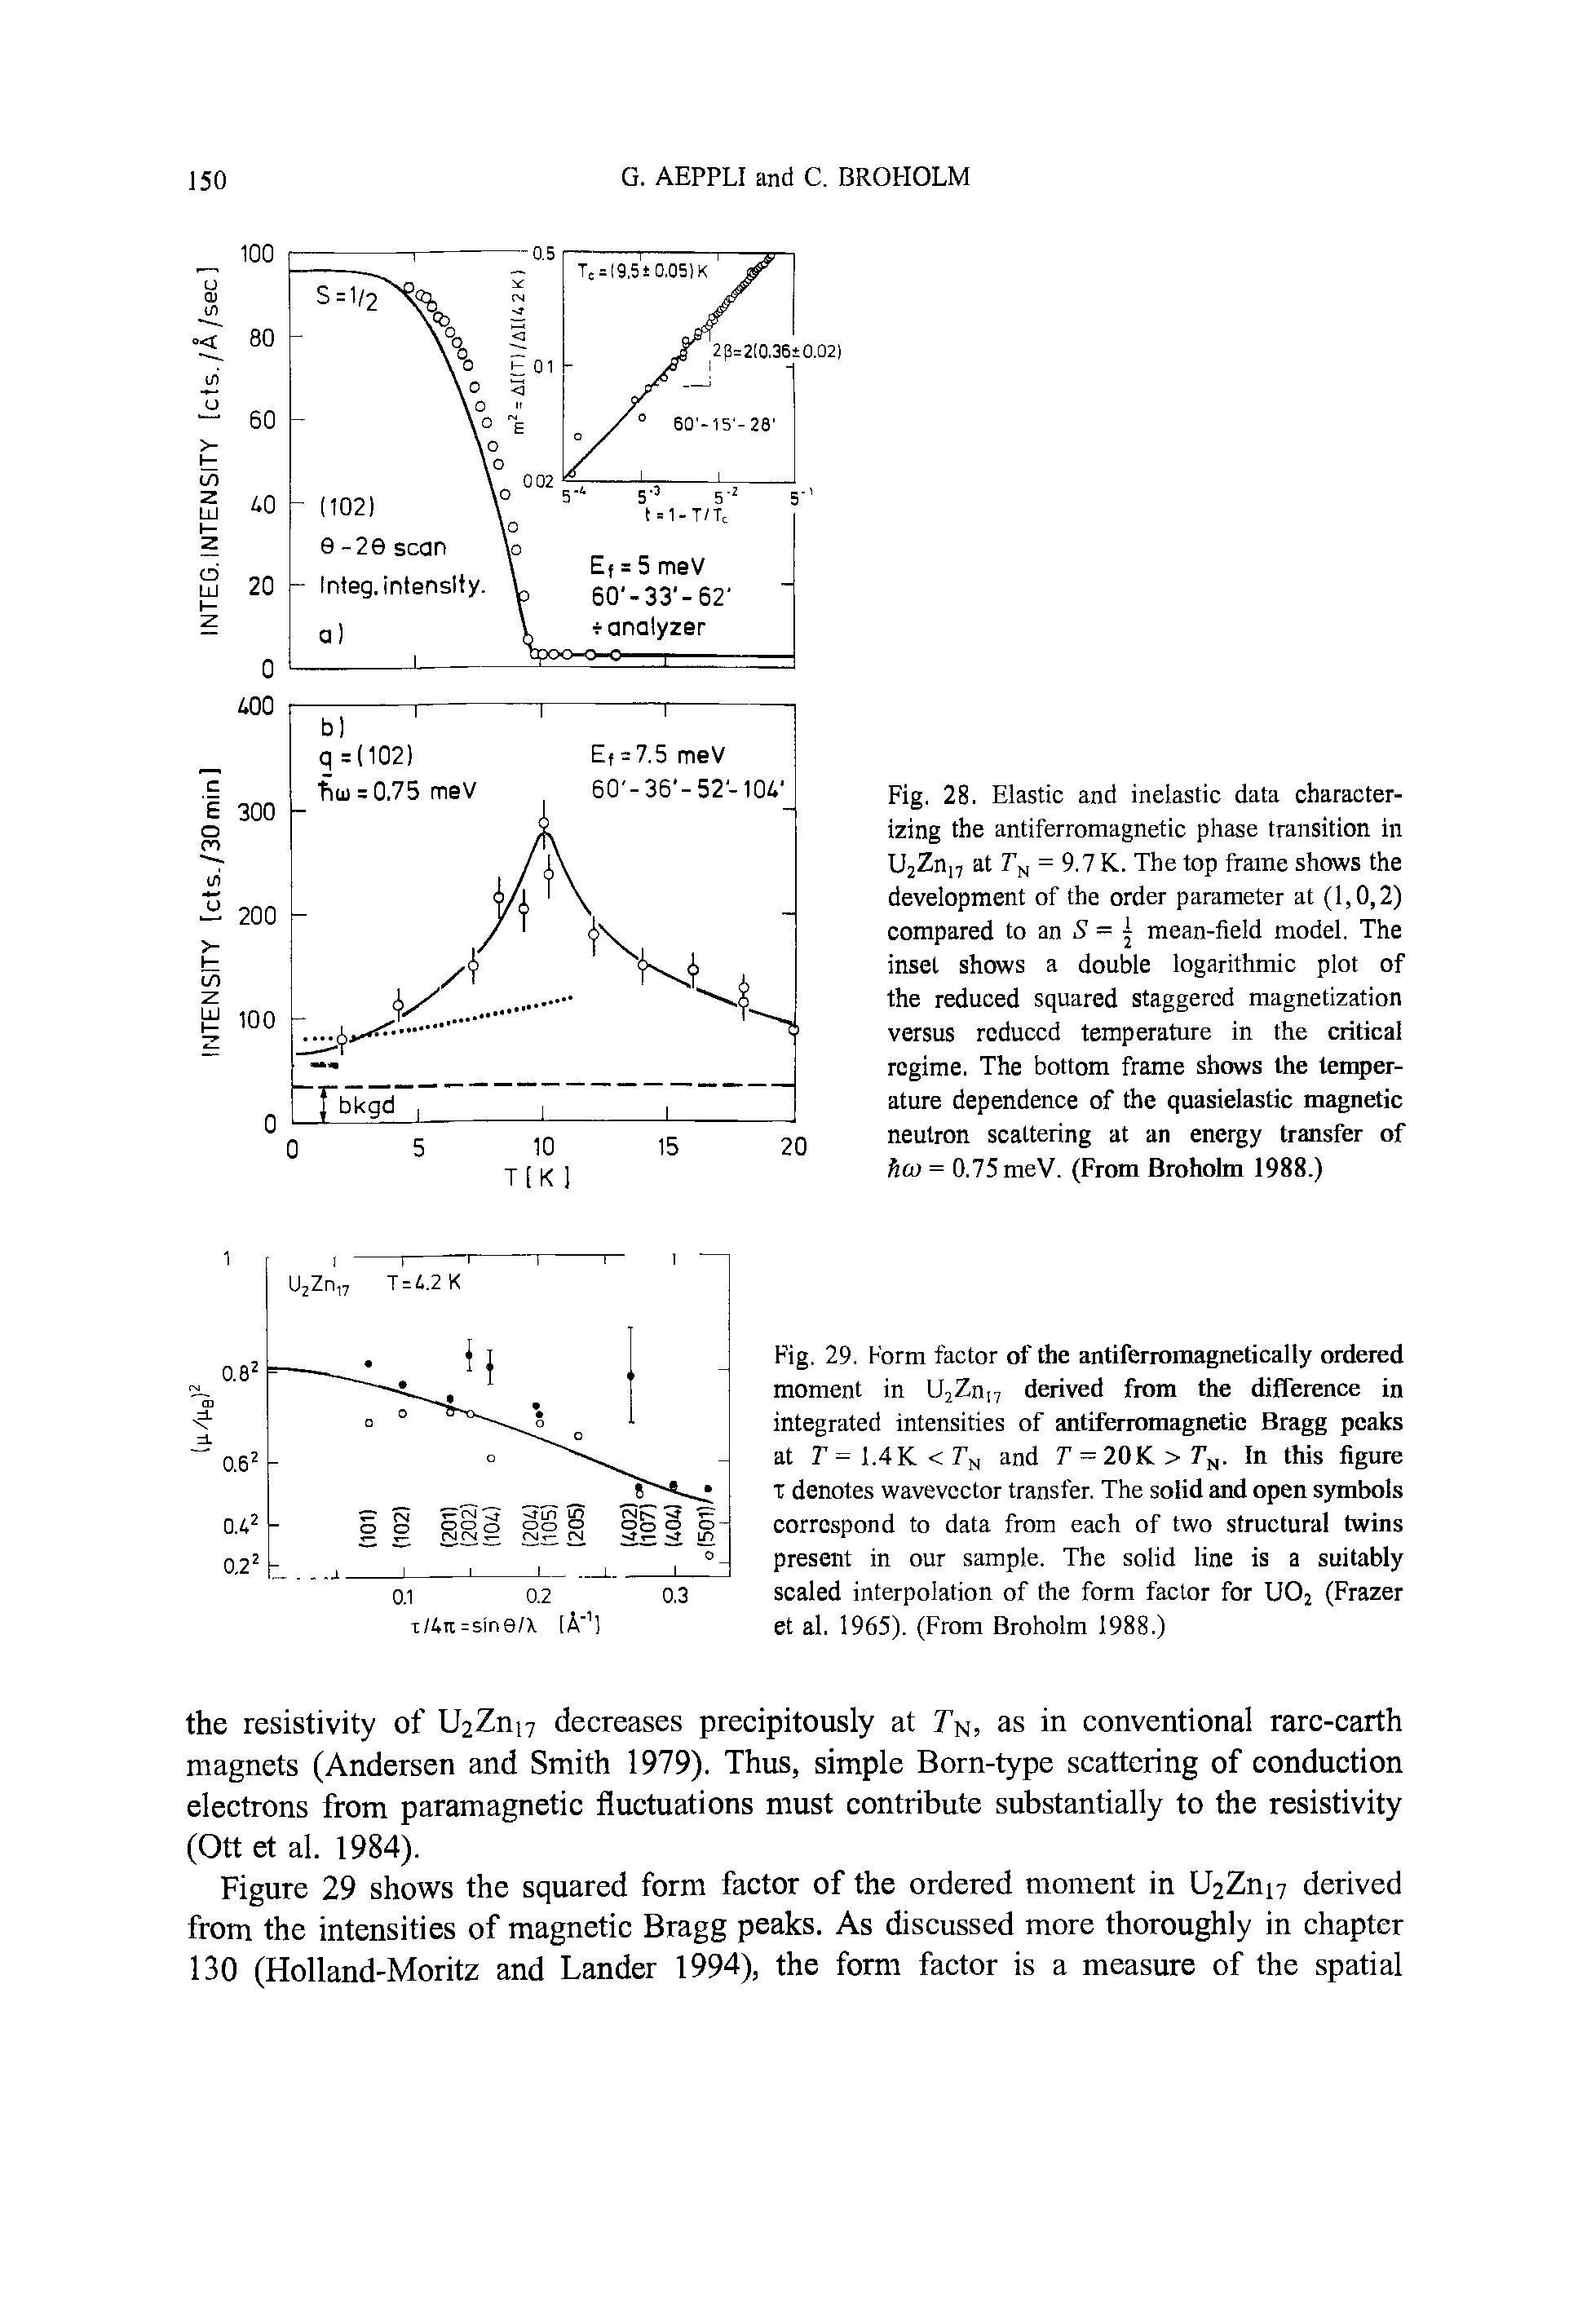 Fig. 28. Elastic and inelastic data characterizing the antiferromagnetic phase transition in U2Zn,7 at r,., = 9.7 K. The top fraine shows the development of the order parameter at (1,0,2) compared to an S = mean-field model. The inset shows a double logarithmic plot of the reduced squared staggered magnetization versus reduced temperature in the critical regime. The bottom frame shows the temperature dependence of the quasielastic magnetic neutron scattering at an energy transfer of fico = 0.75 meV. (From Bioholm 1988.)...